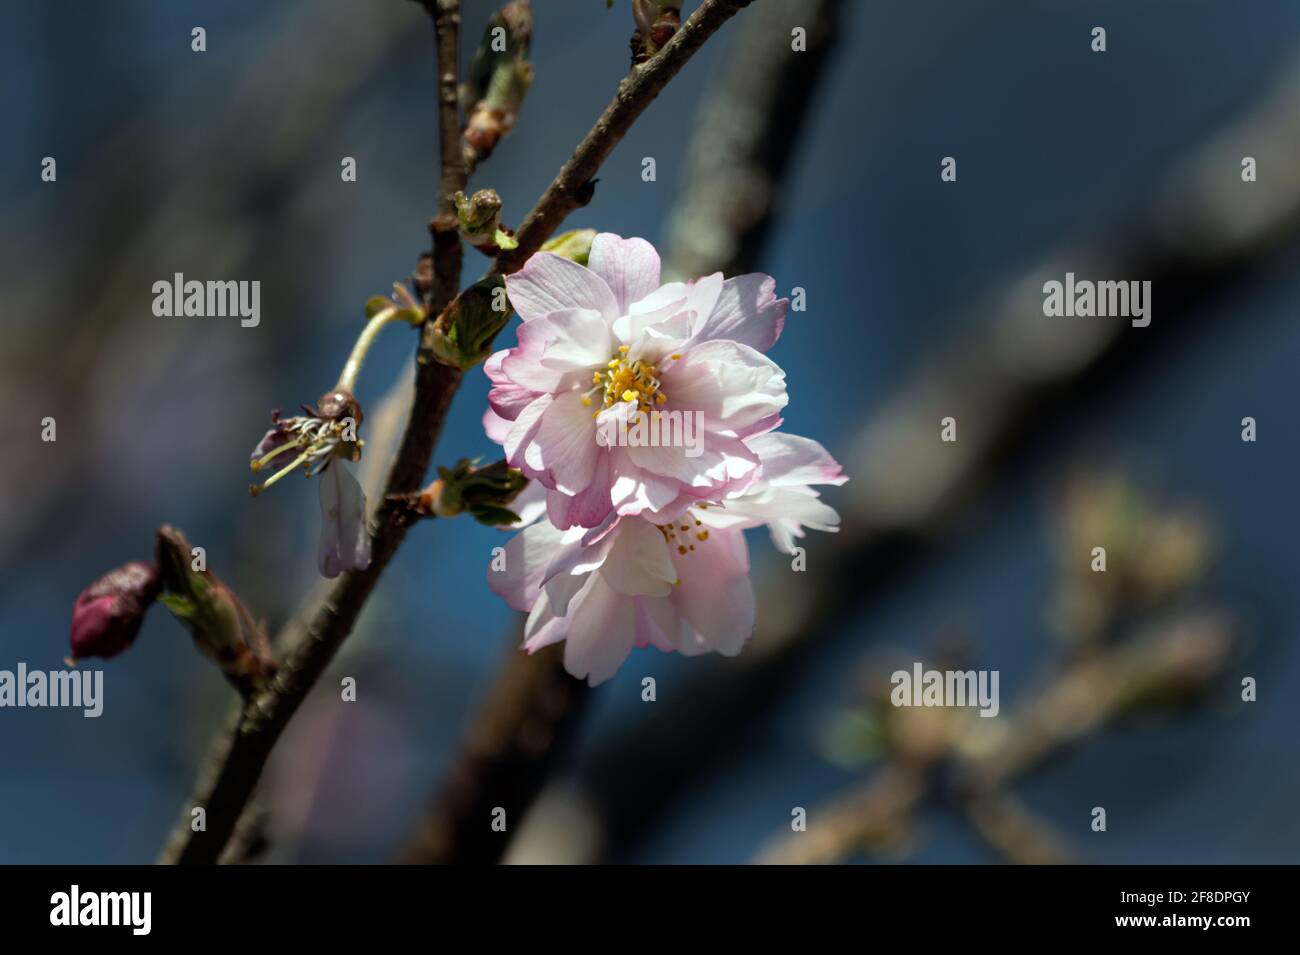 Pink ornamental cherry tree flowers in spring, against a blue sky, close up Stock Photo